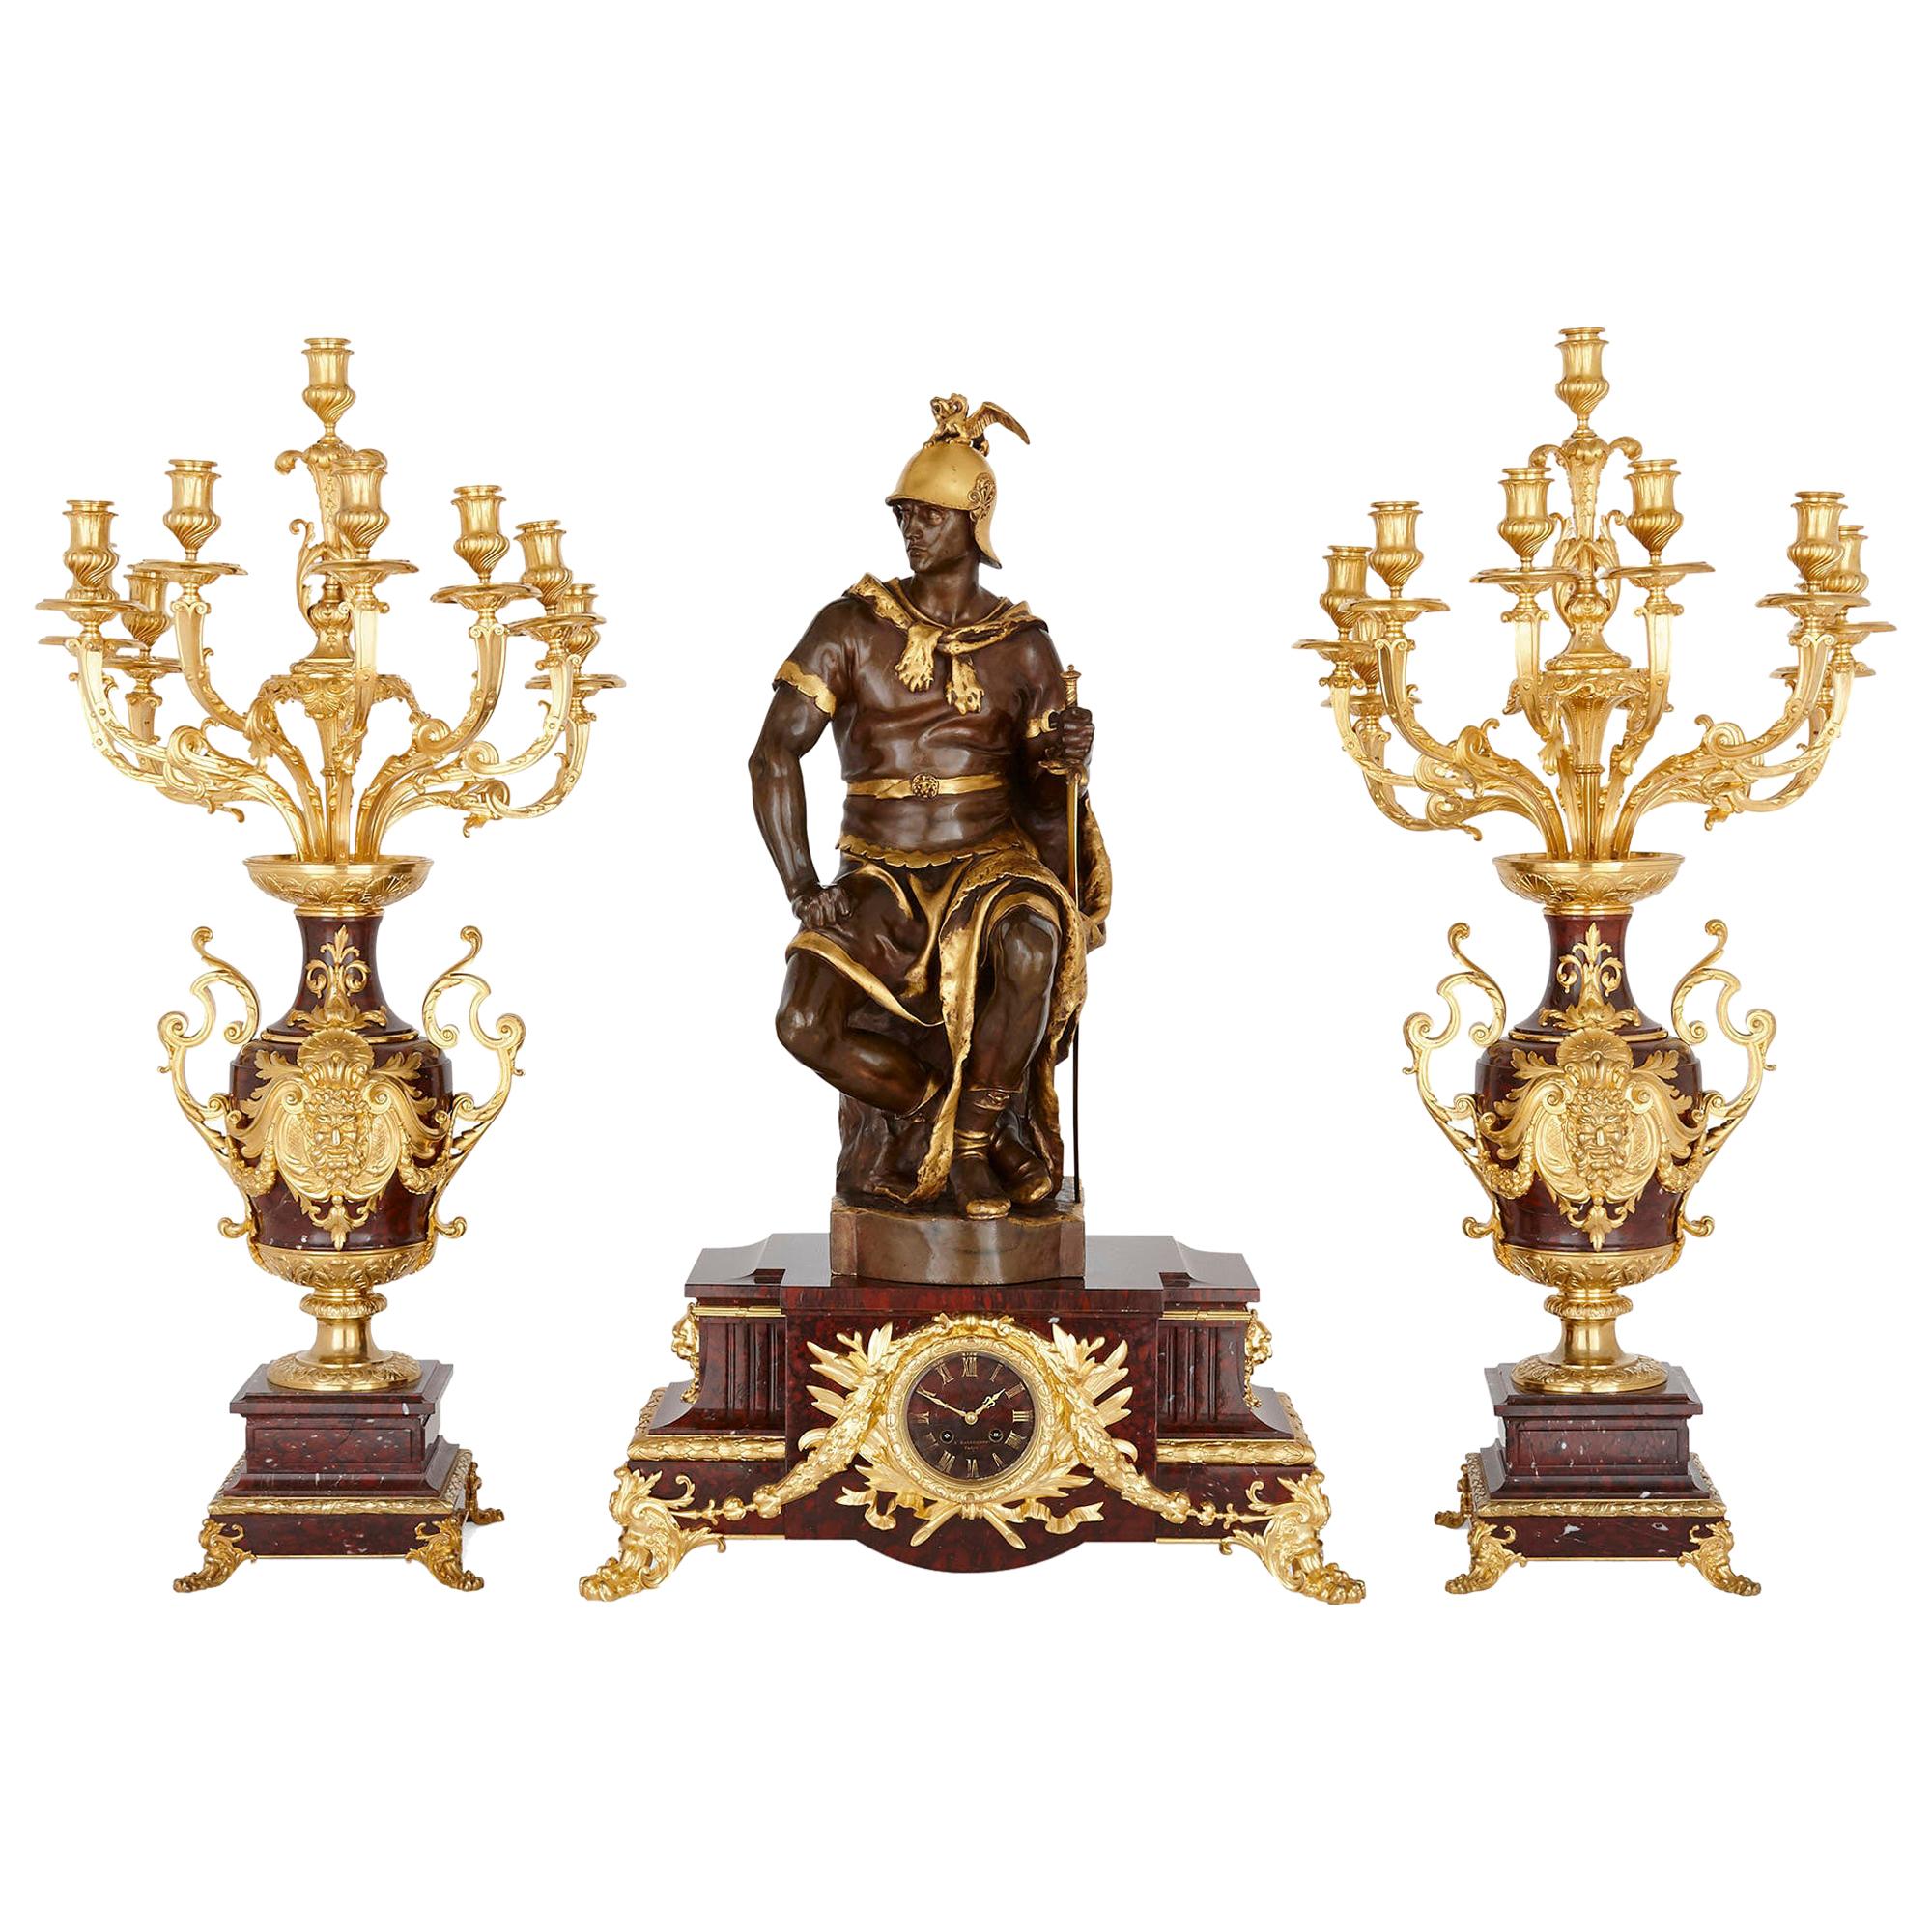 Marble, Gilt, and Patinated Bronze Three-Piece Clock Set by Barbedienne For Sale